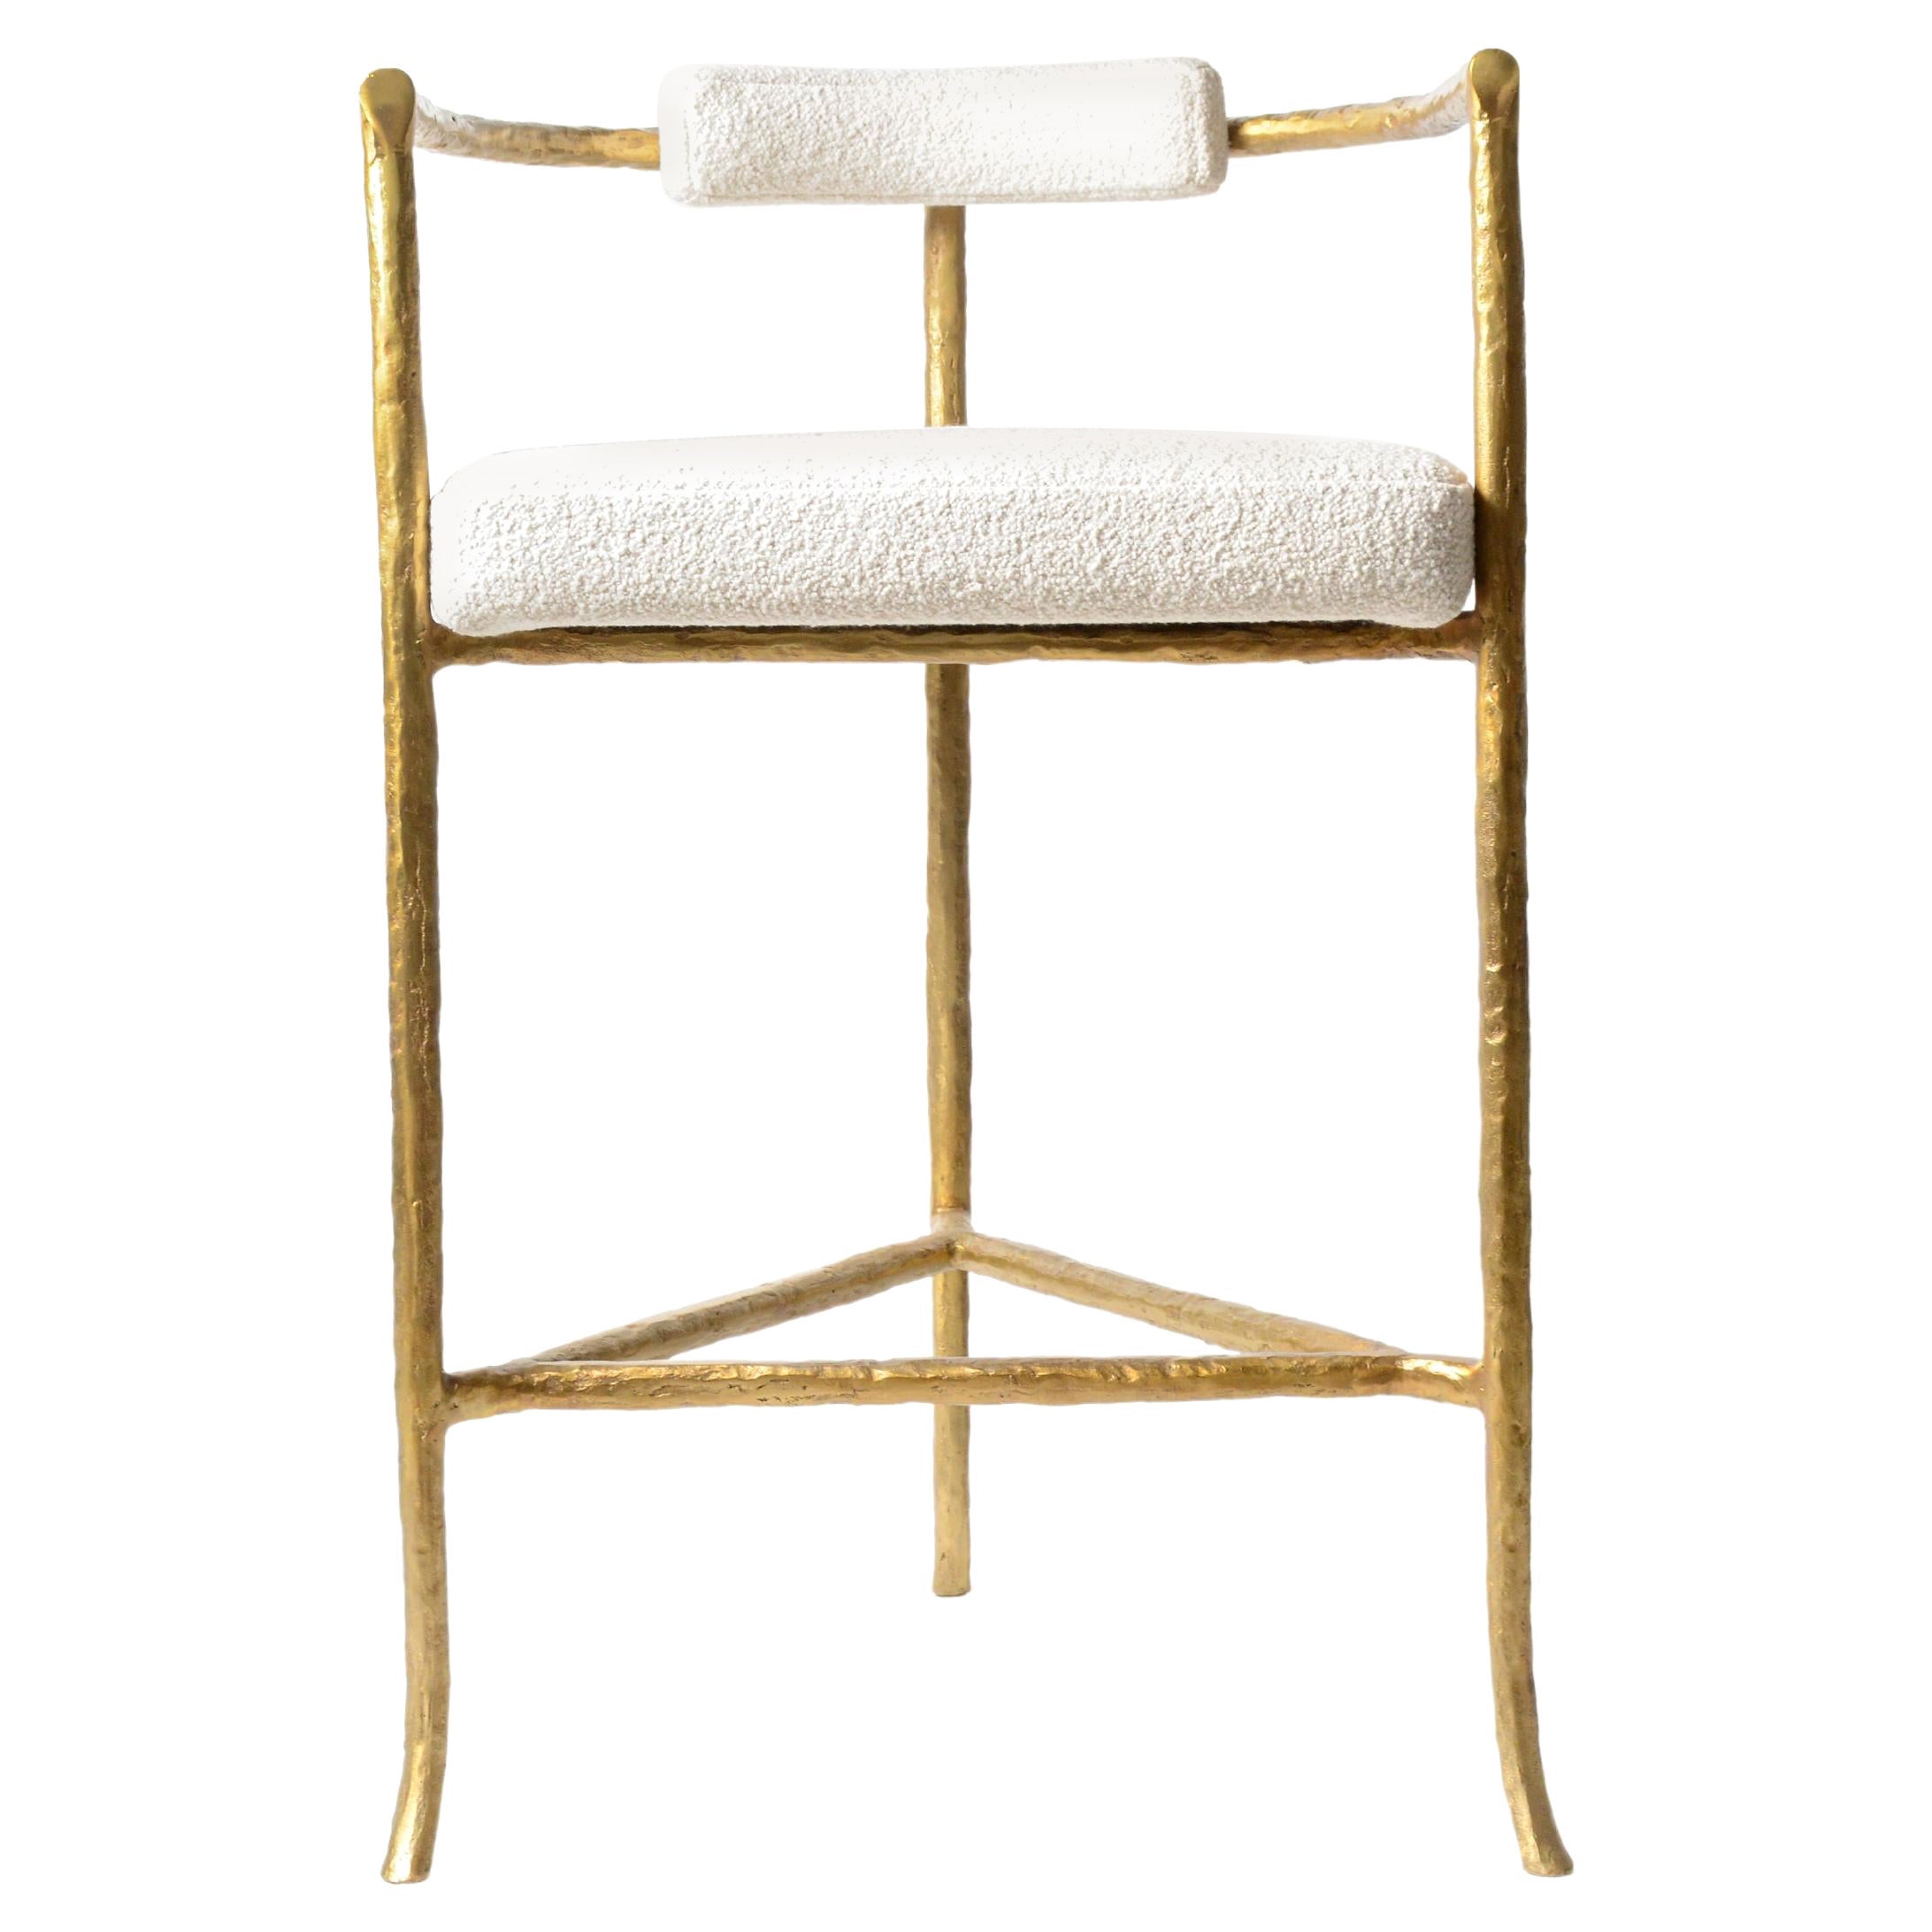 Cast-bronze twig barstool in gold finish with ivory boucle seat cushion by Elan Atelier.

Inspired by the sculpture of Alberto Giacometti, the twig barstool is a sculptural form cast in solid bronze with a comfortable seat cushion and backrest.